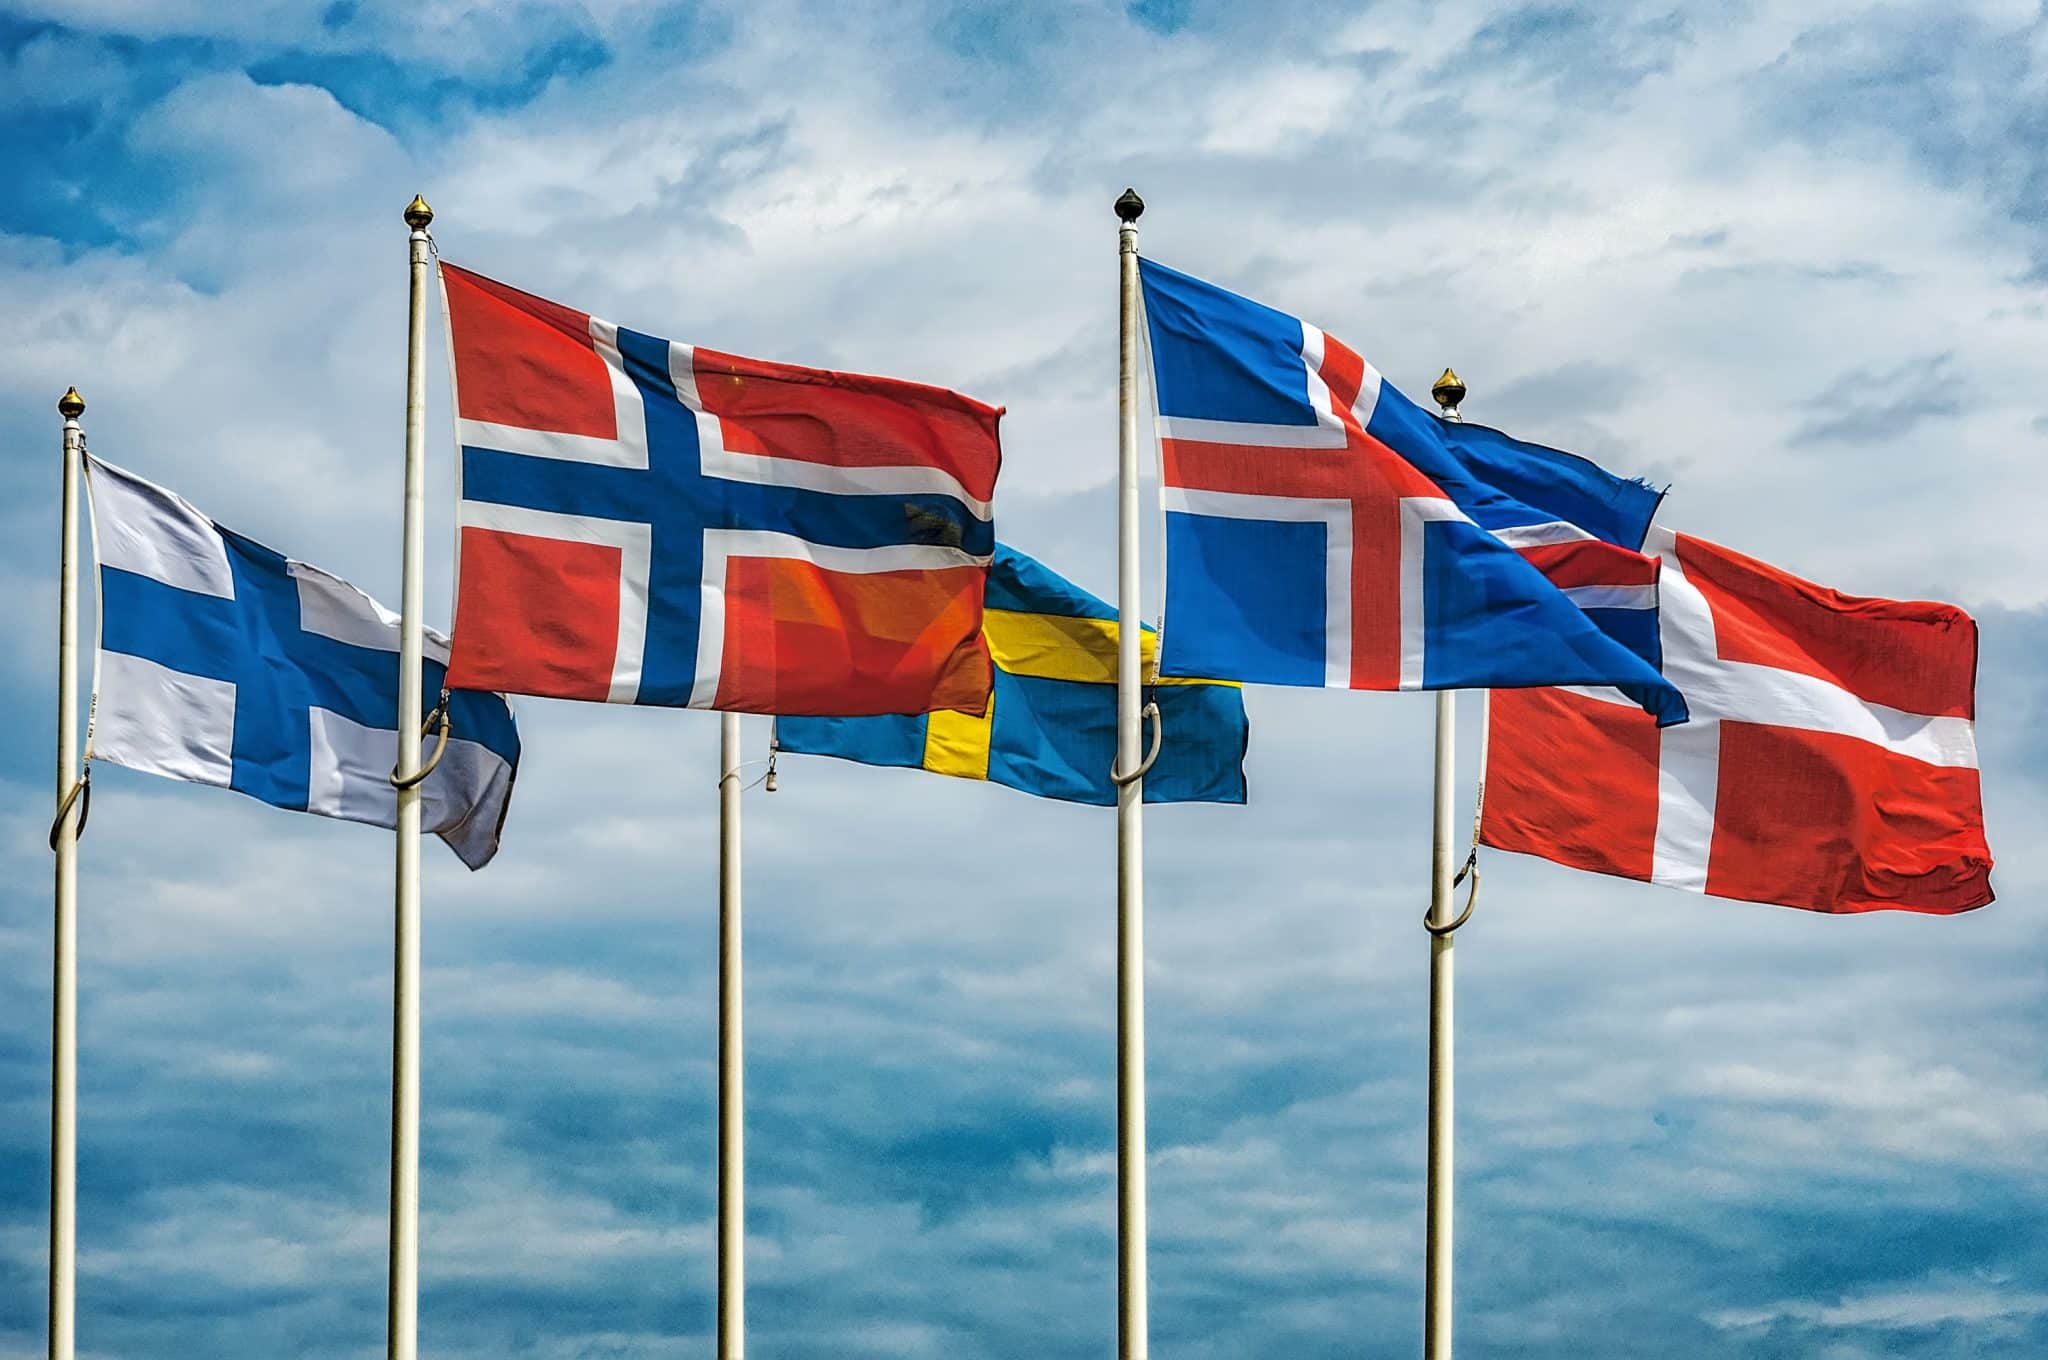 Five Nordic flags waving against a cloudy sky, representing Finland, Norway, Sweden, Iceland, and Denmark from left to right.